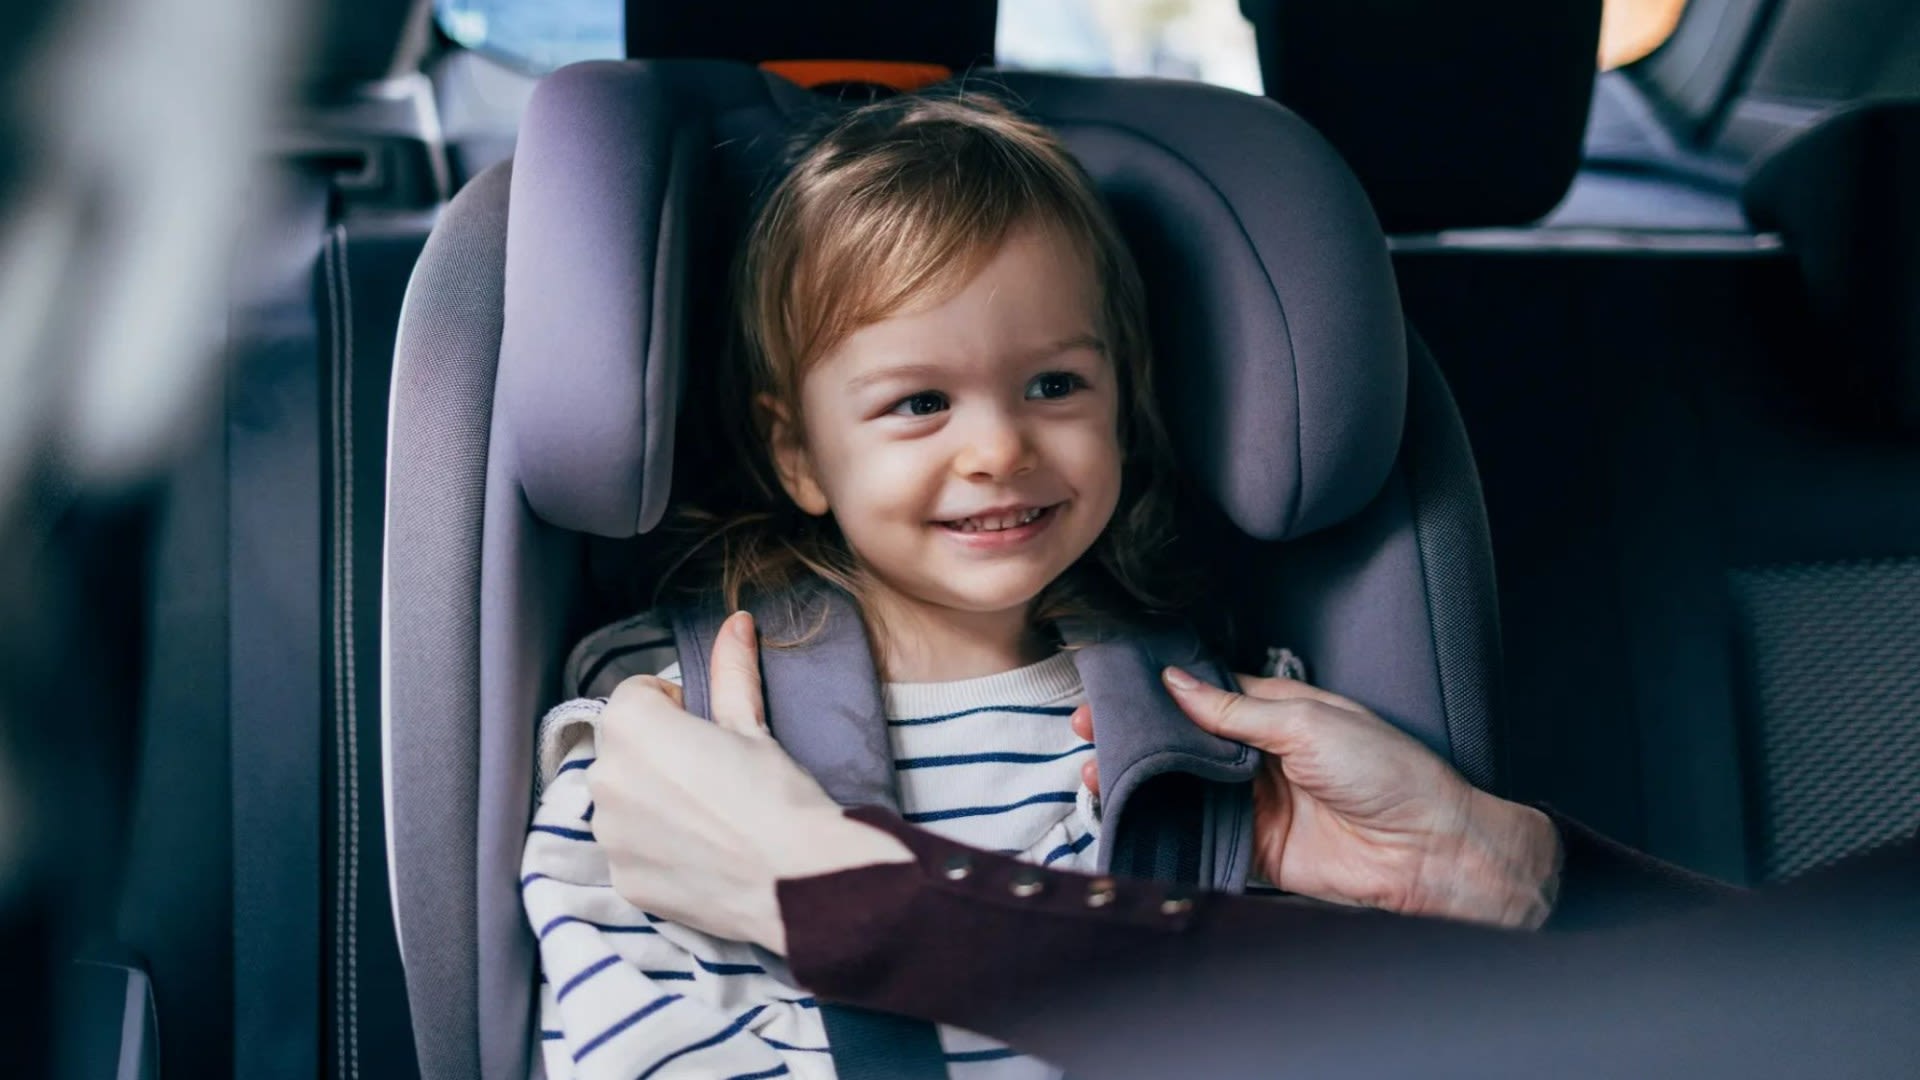 5 seconds is all it takes to watch car seat hack that may save your baby's life